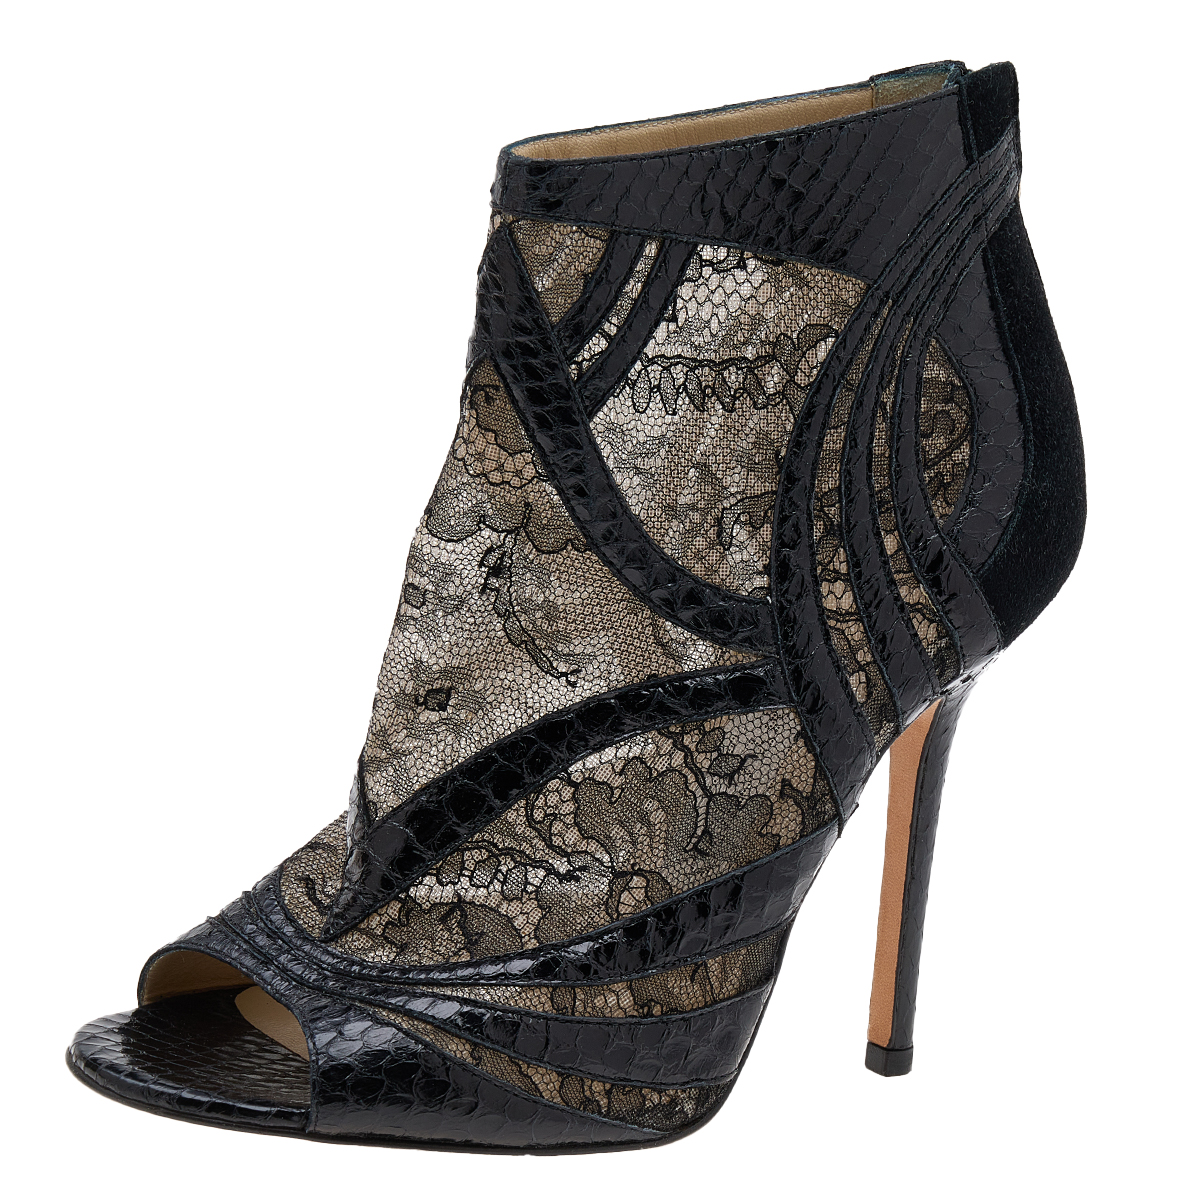 

Jimmy Choo Black Snakeskin and Lace Peep Toe Booties Size